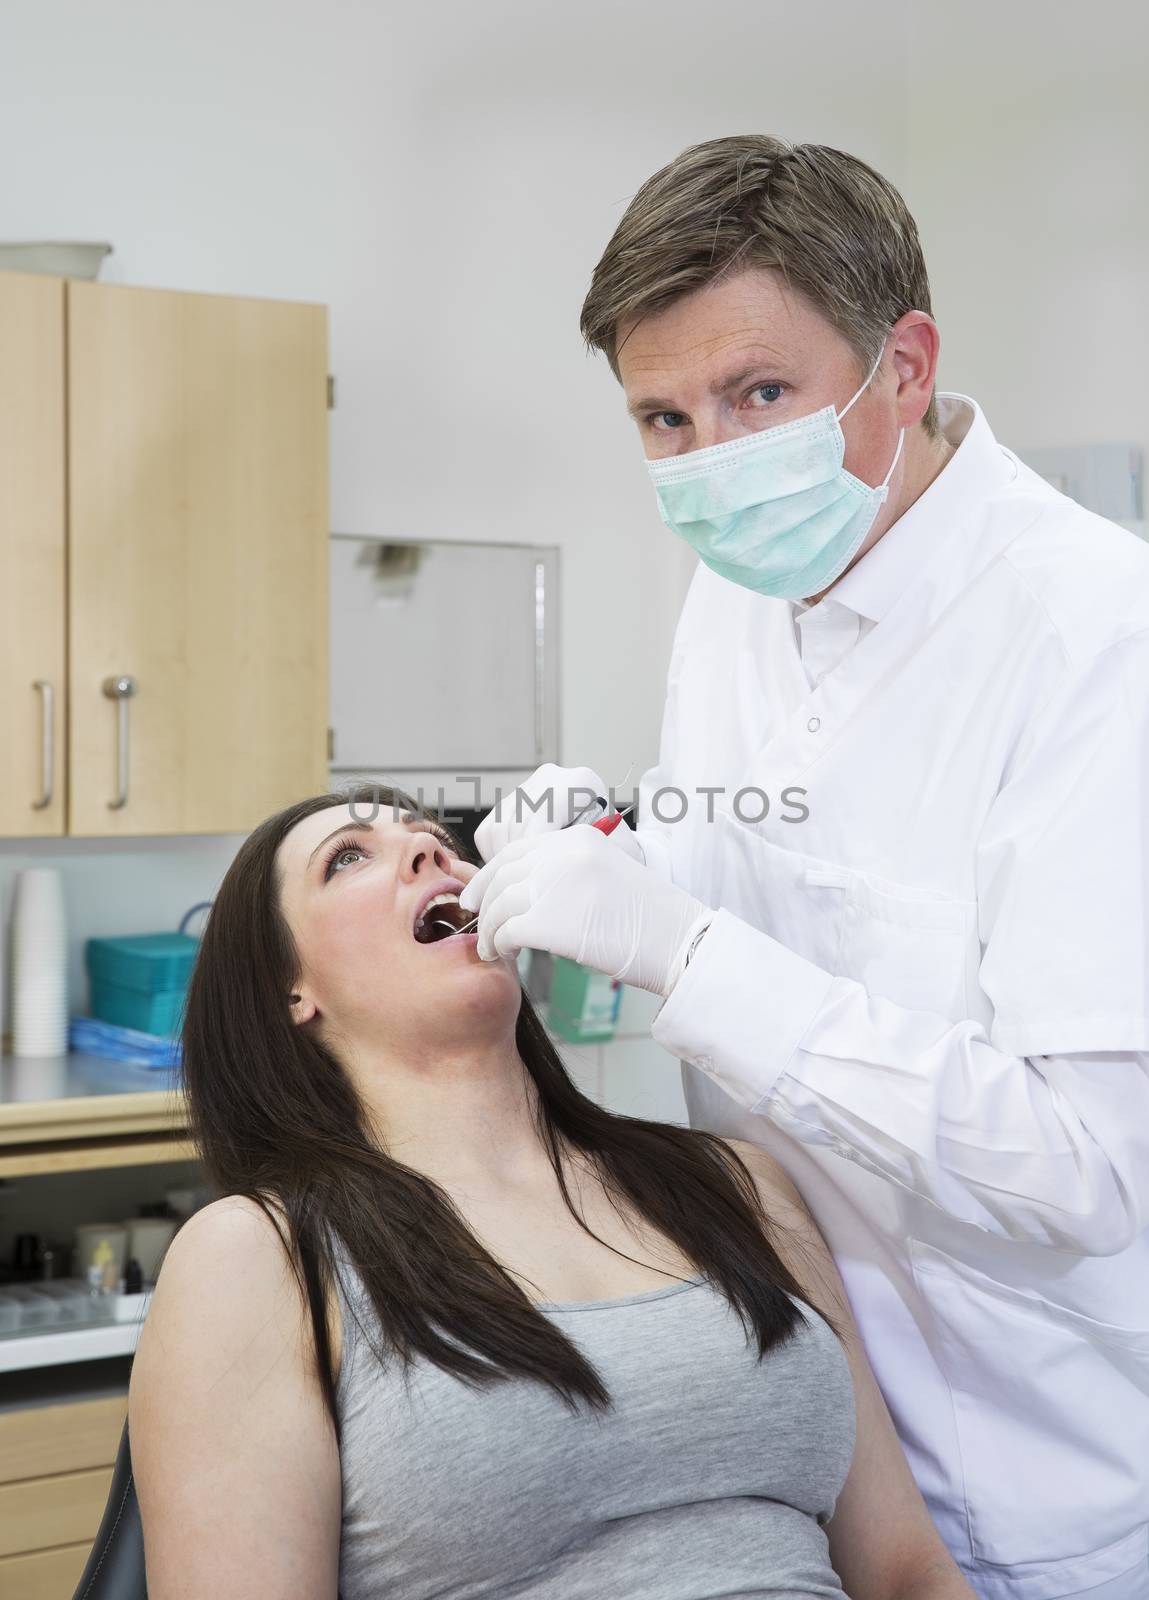 Dentist and Patient by gemenacom